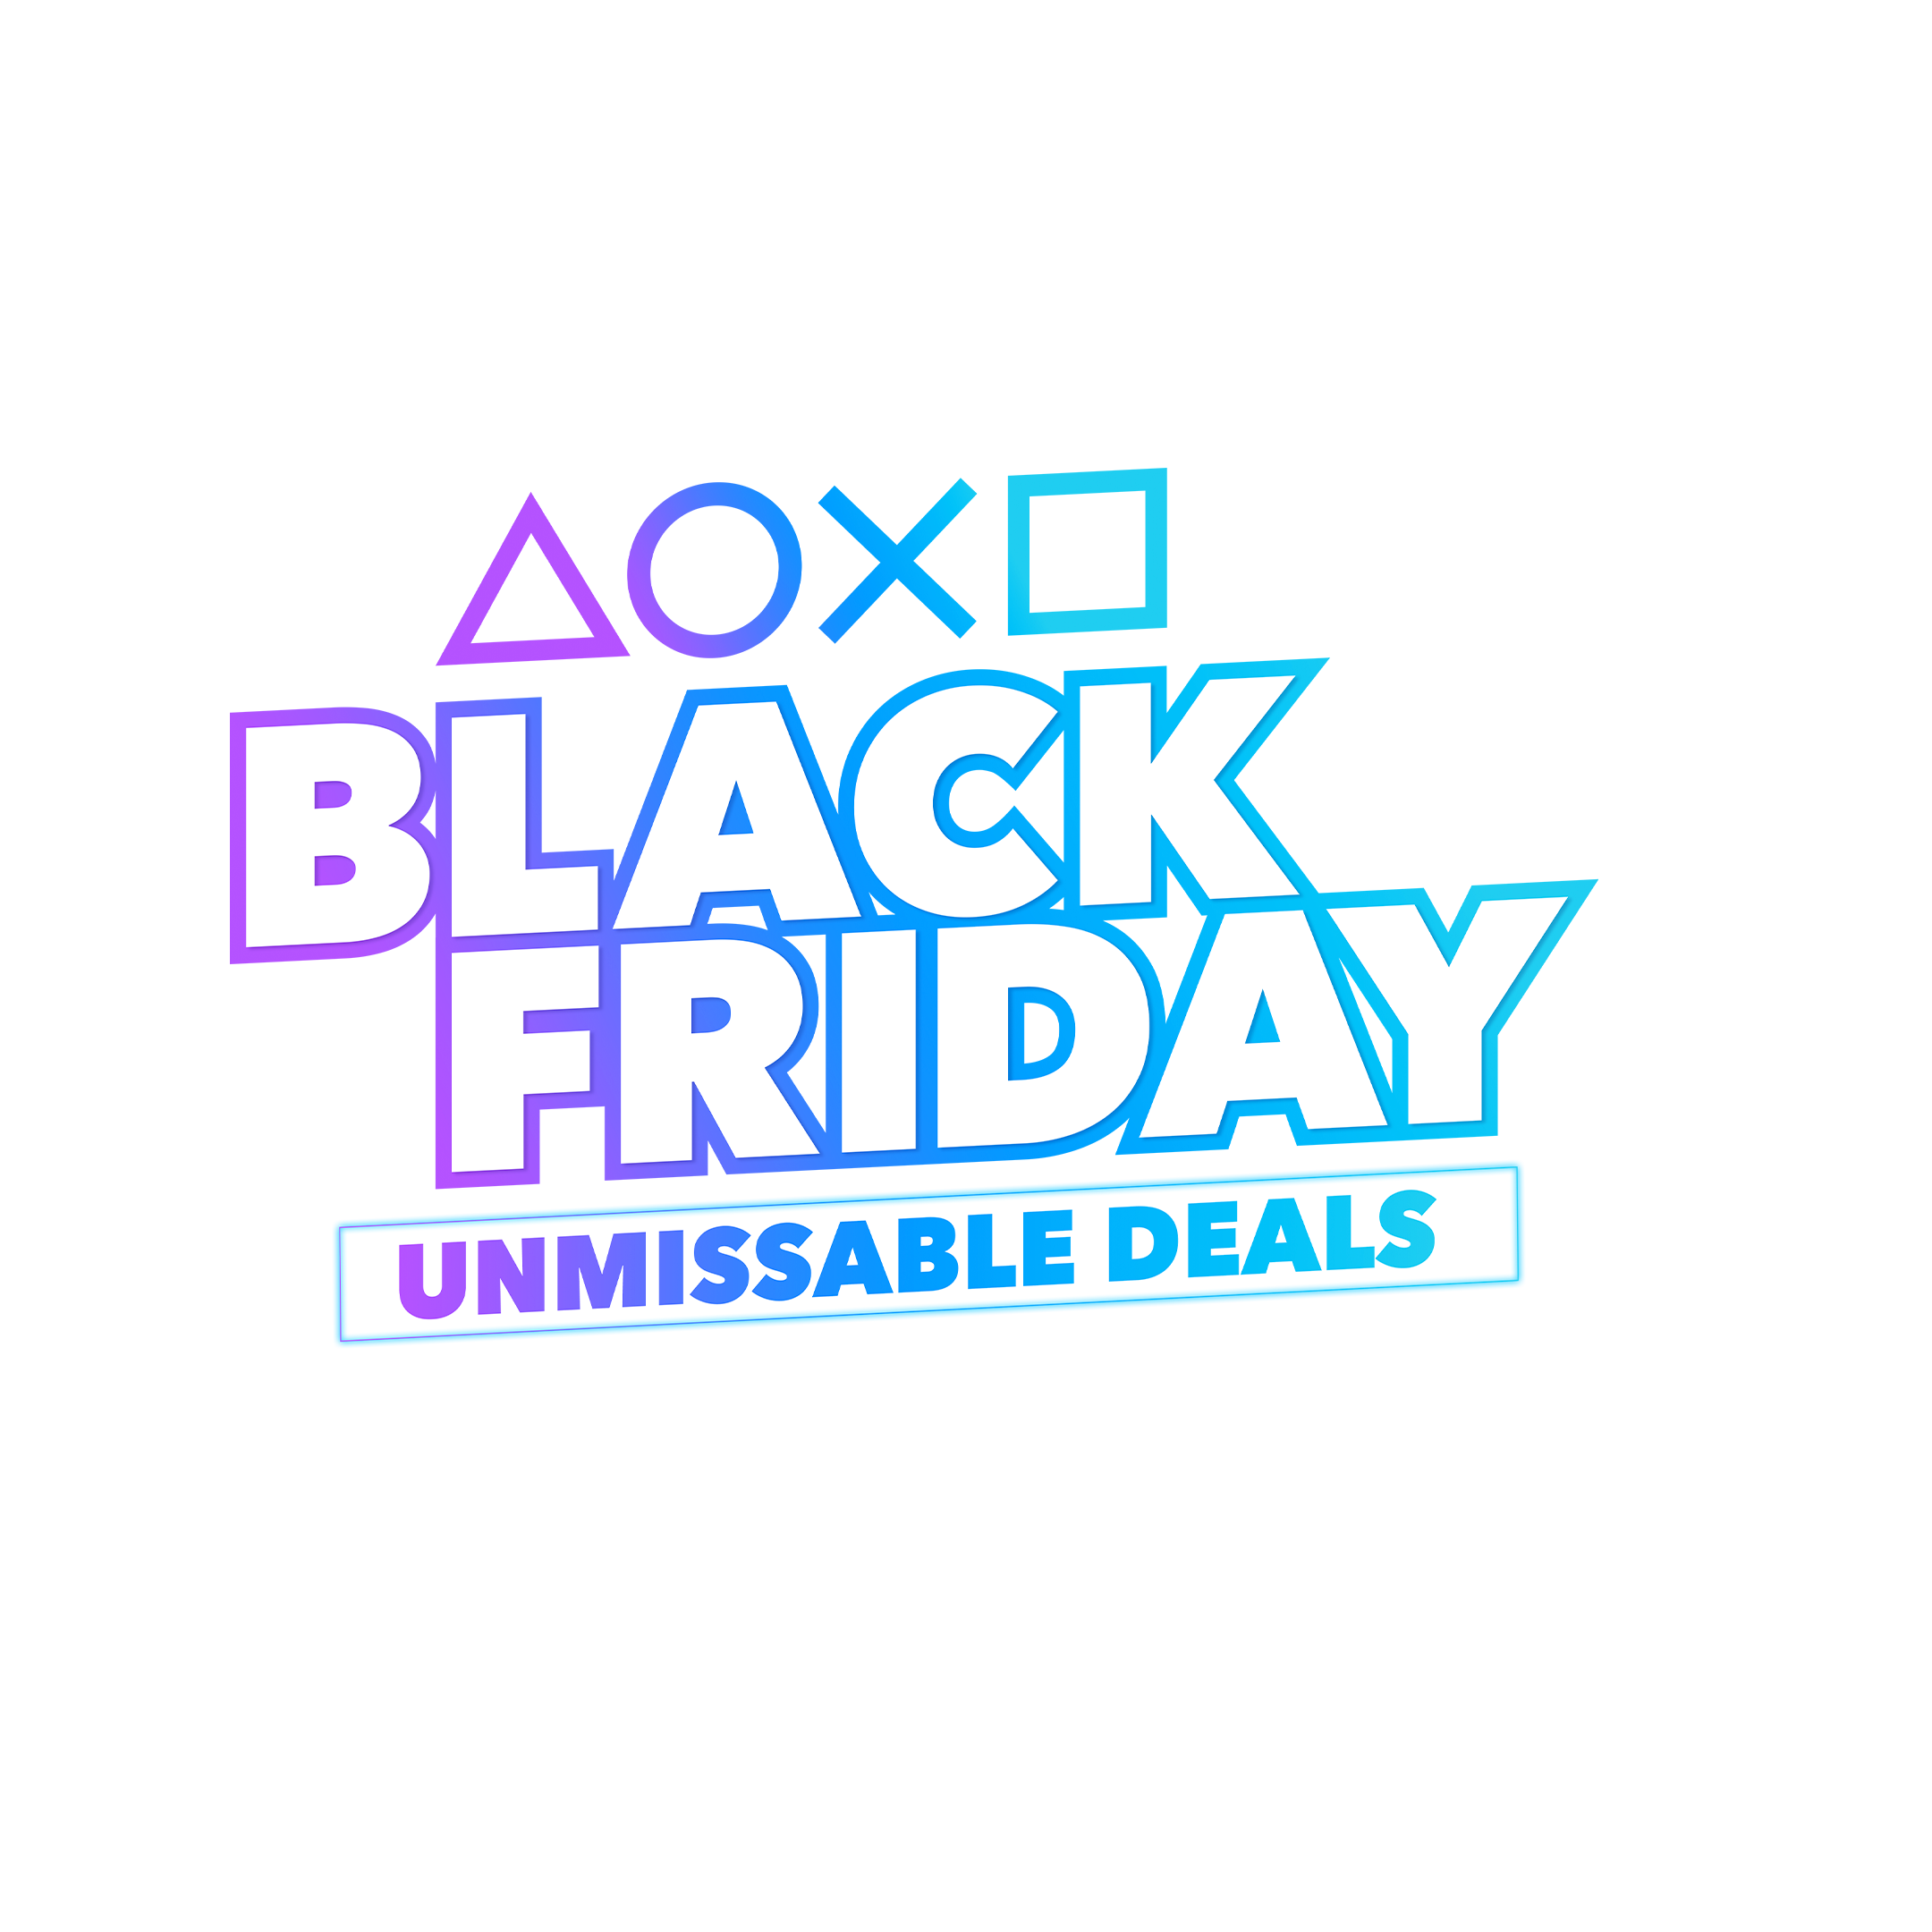 PlayStation on X: Time to talk turkey. Dig in to Black Friday